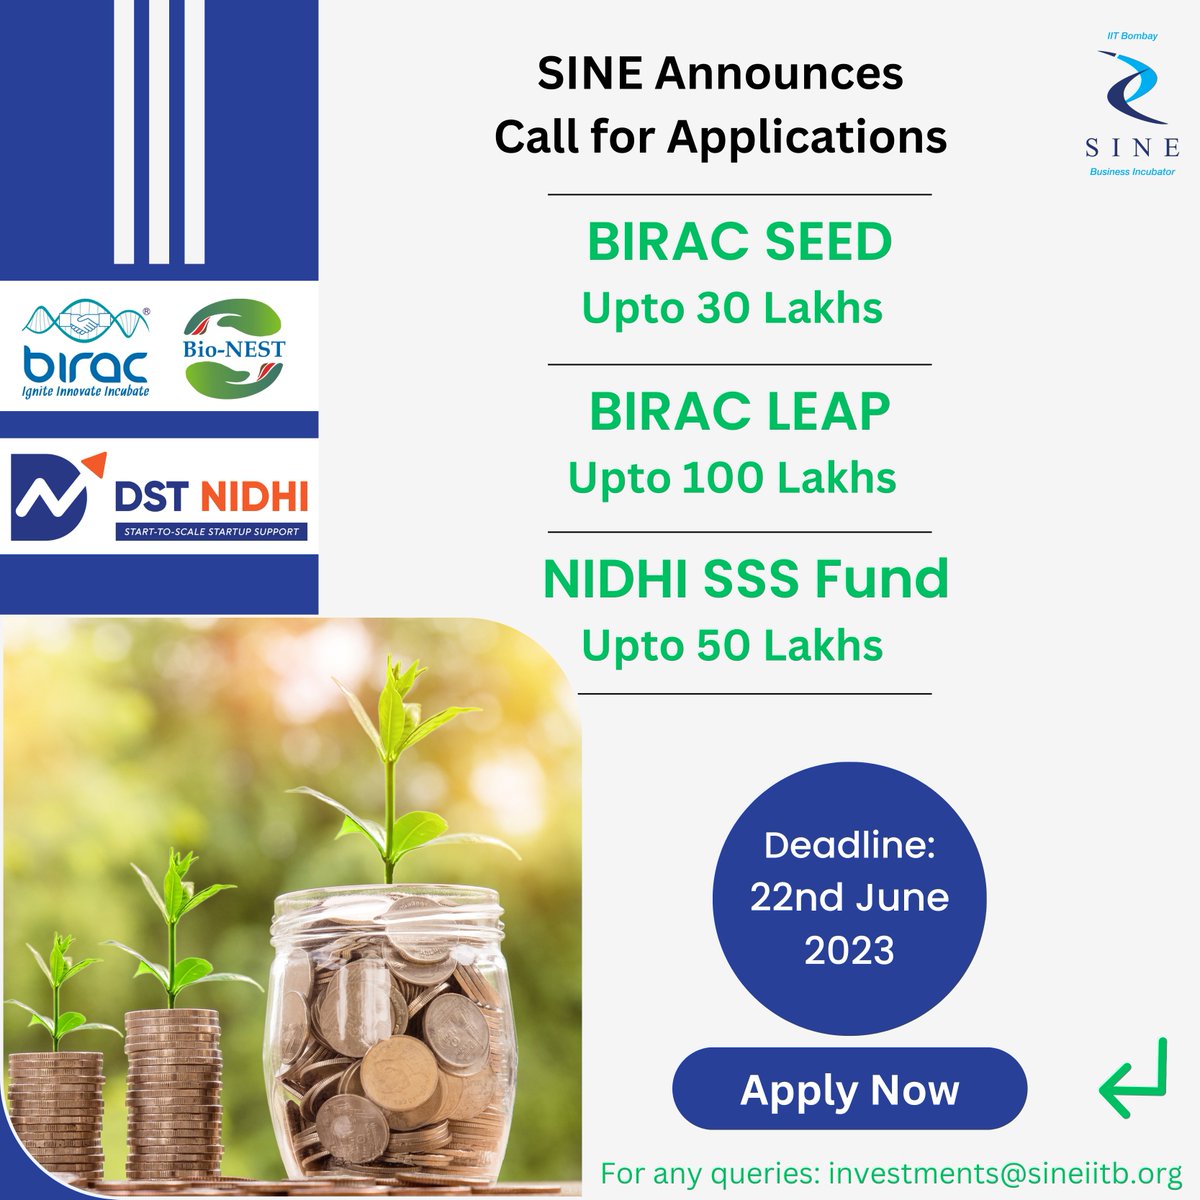 2] DST NIDHI SSS: Funding up to INR 50 lakhs

To Apply: form.jotform.com/220880967966474

Last date of application: 22nd June 2023 till 5:00 PM

#callforapplications #fundingsupport #grant #DSTNIDHI #BIRAC